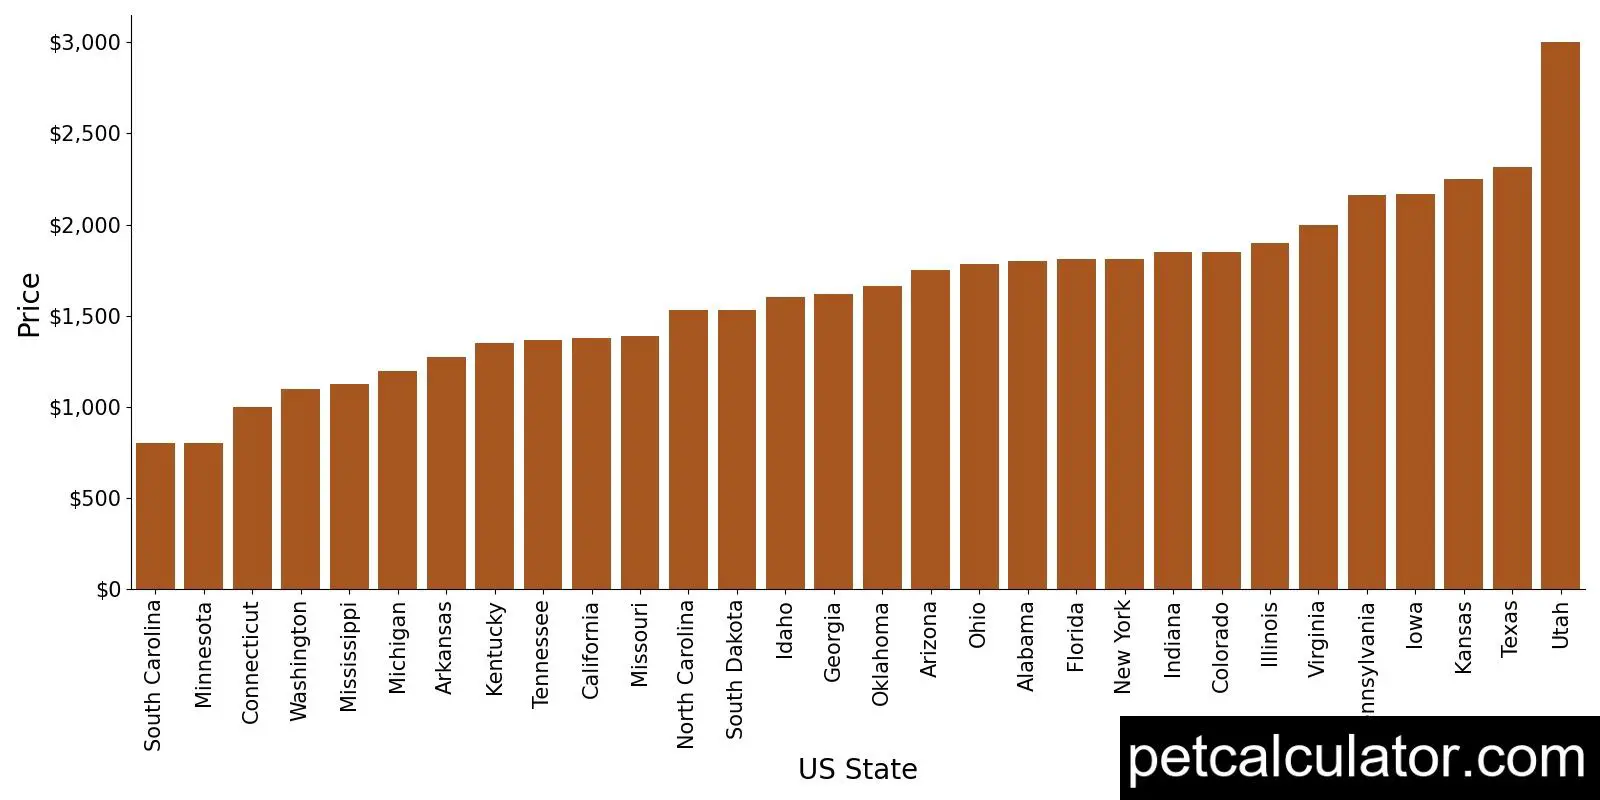 Price of Yorkipoo by US State 